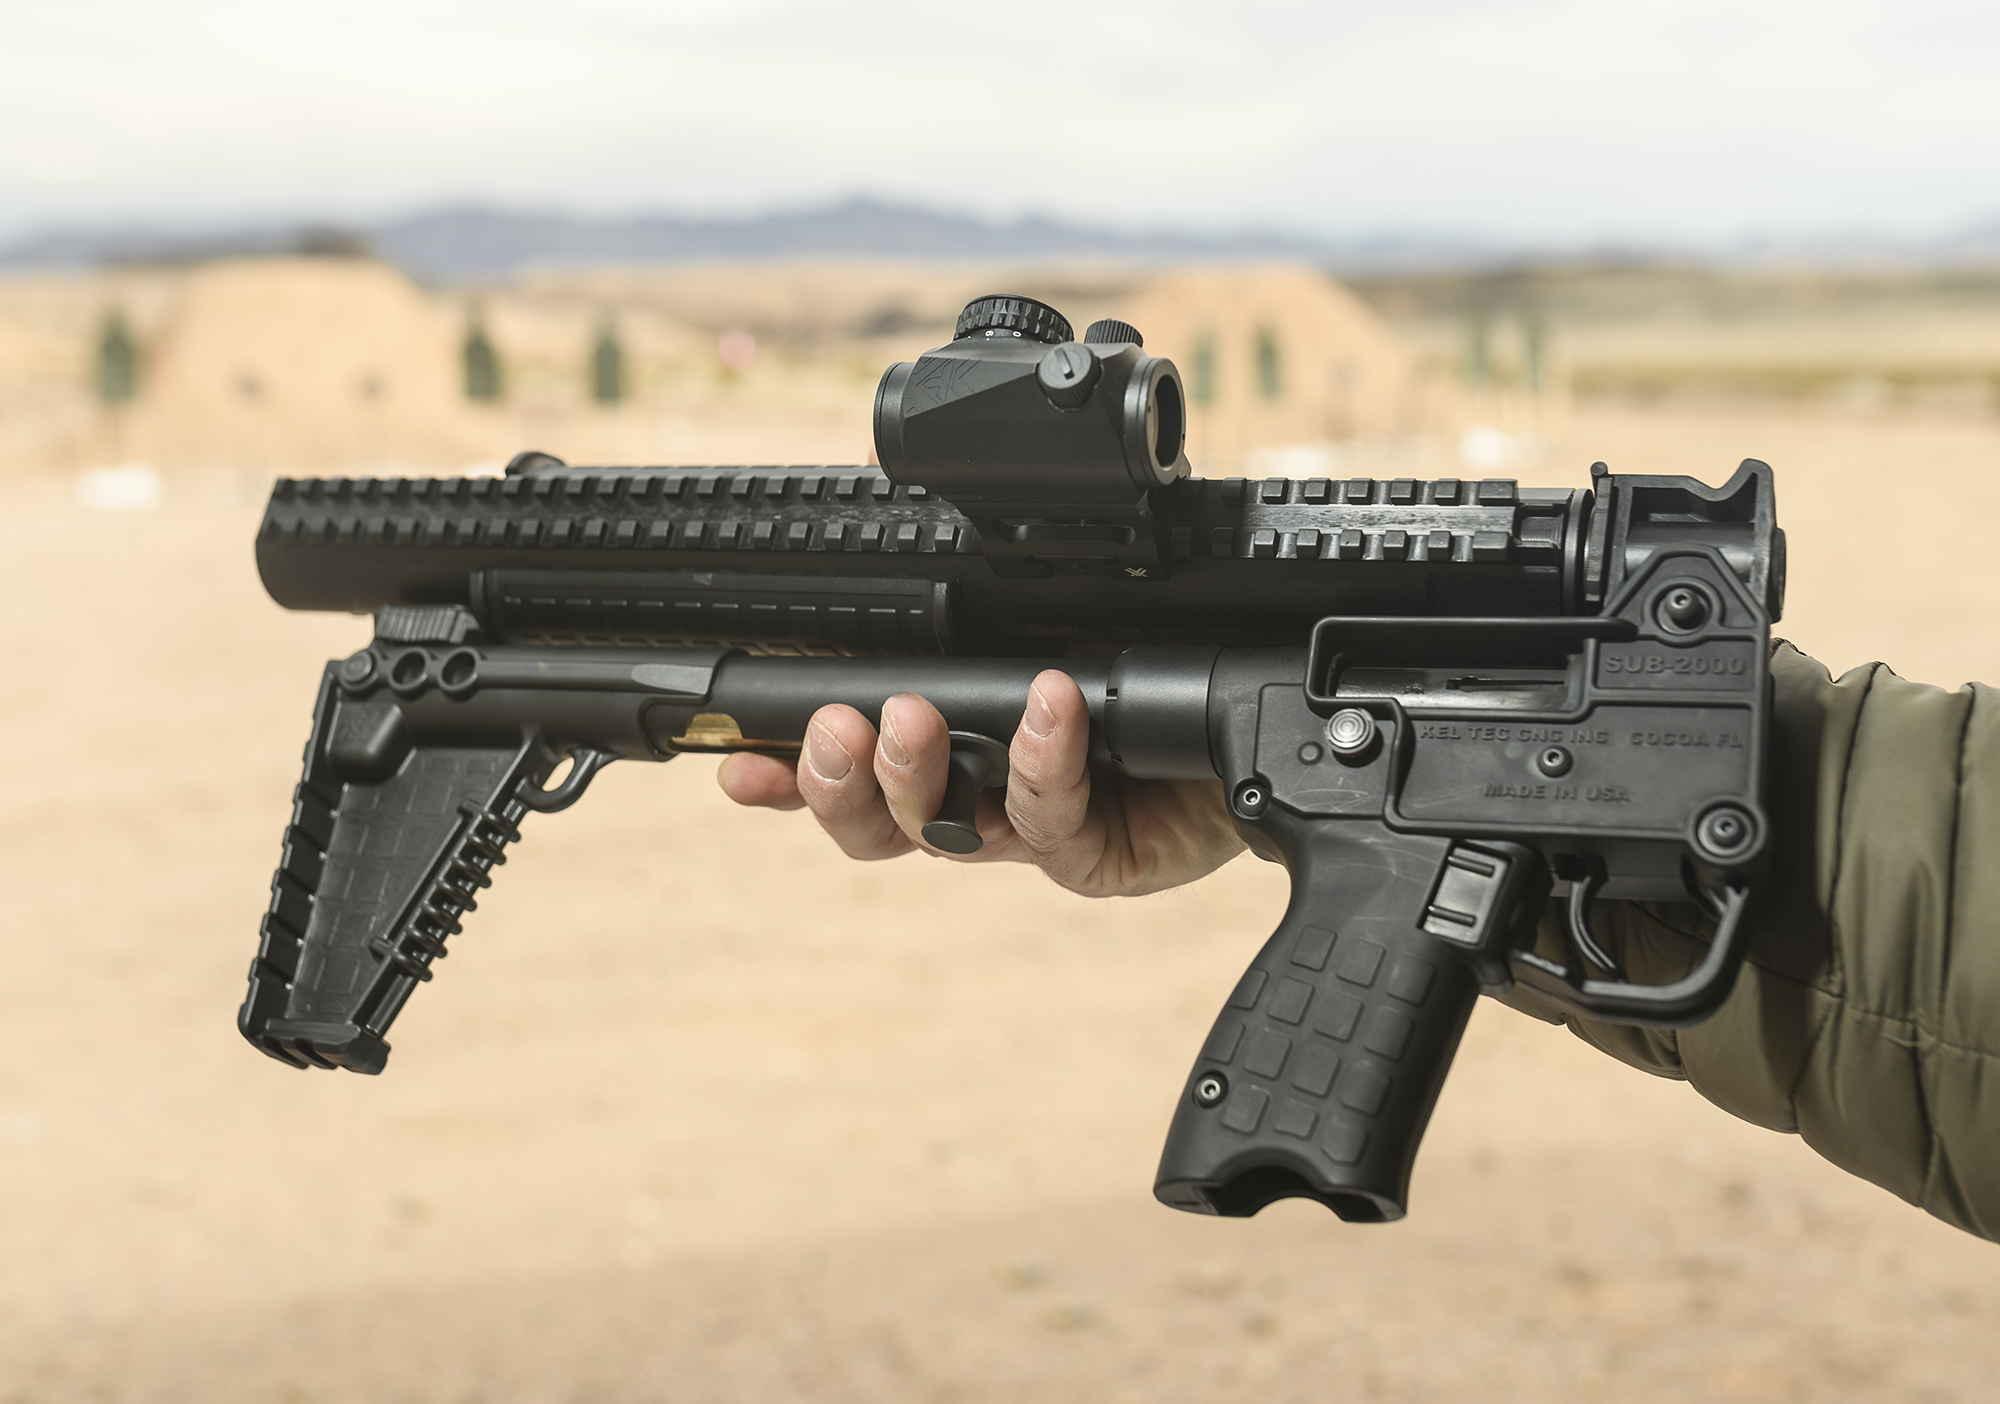 a 9mm pistol-caliber carbine, folded in half, in hand at the range